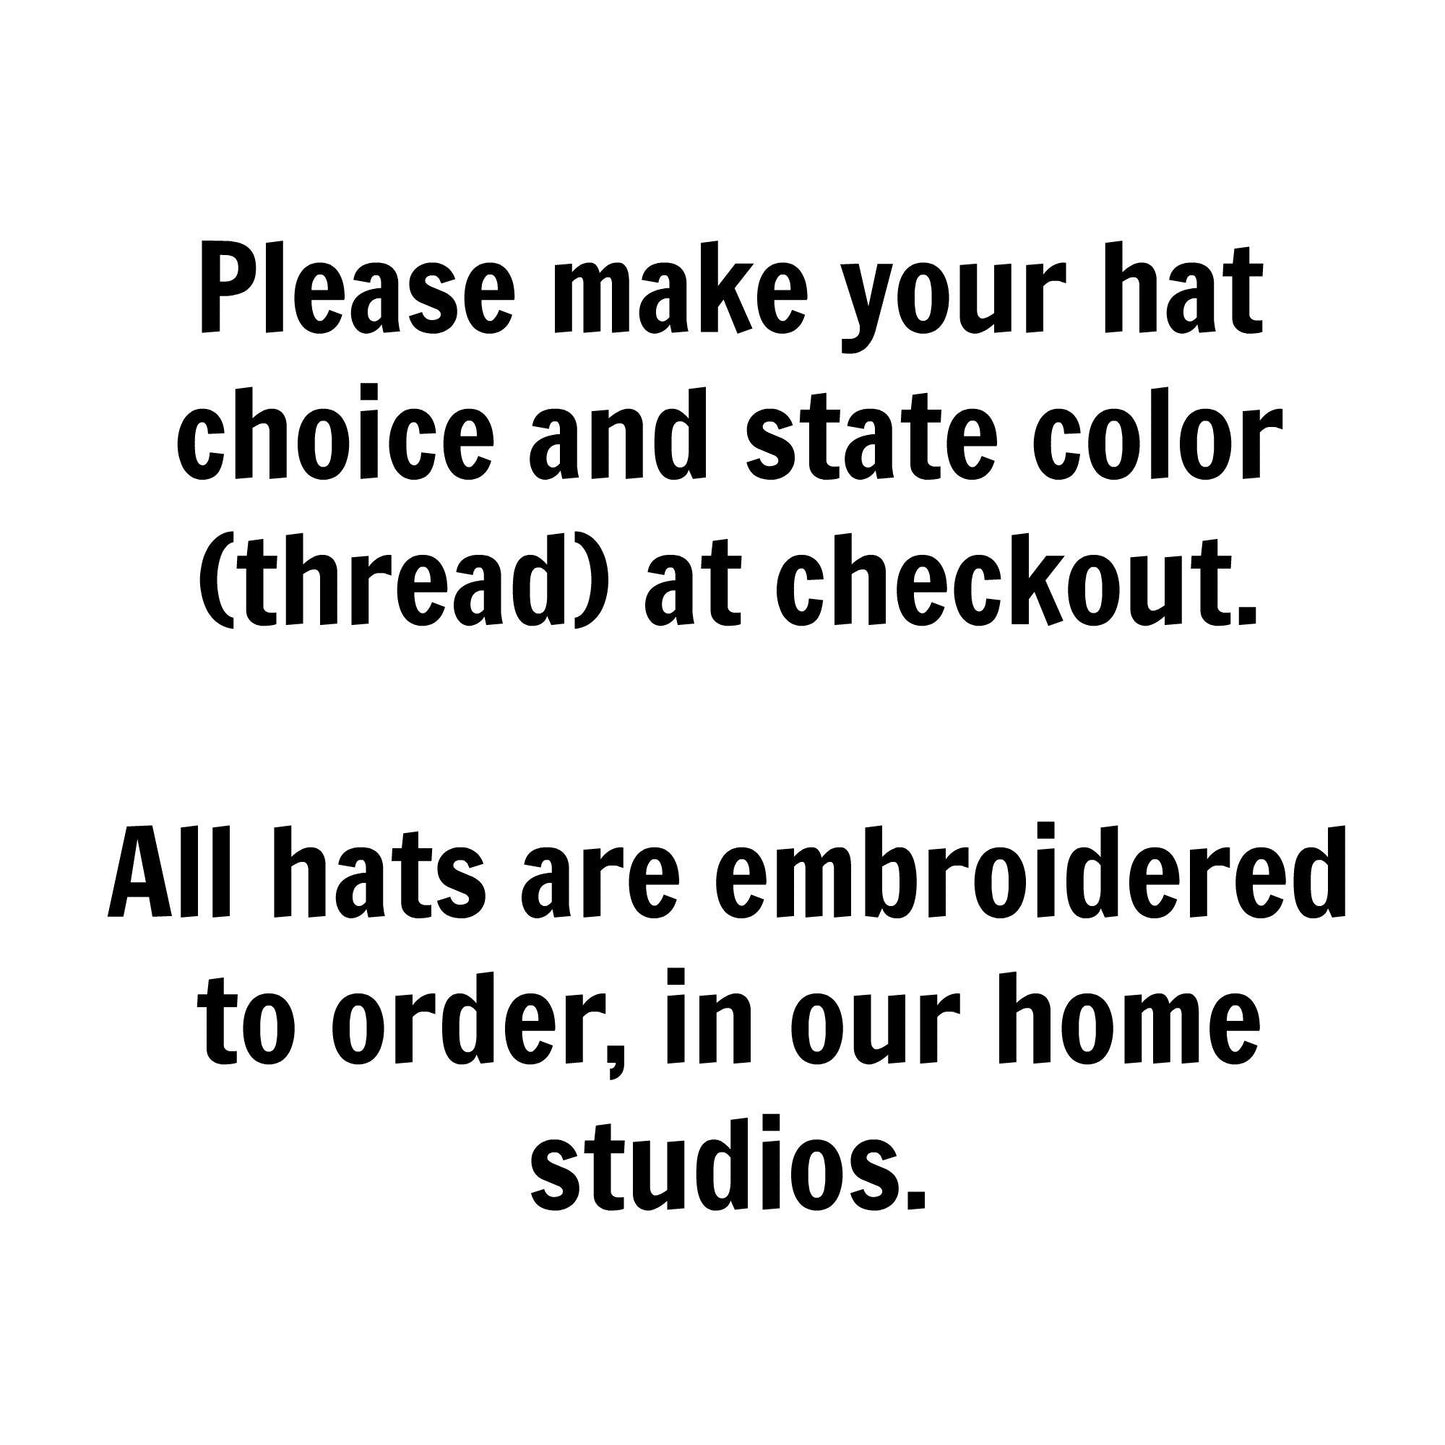 New York Hat | Distressed Snapback Trucker | state cap | many color choices